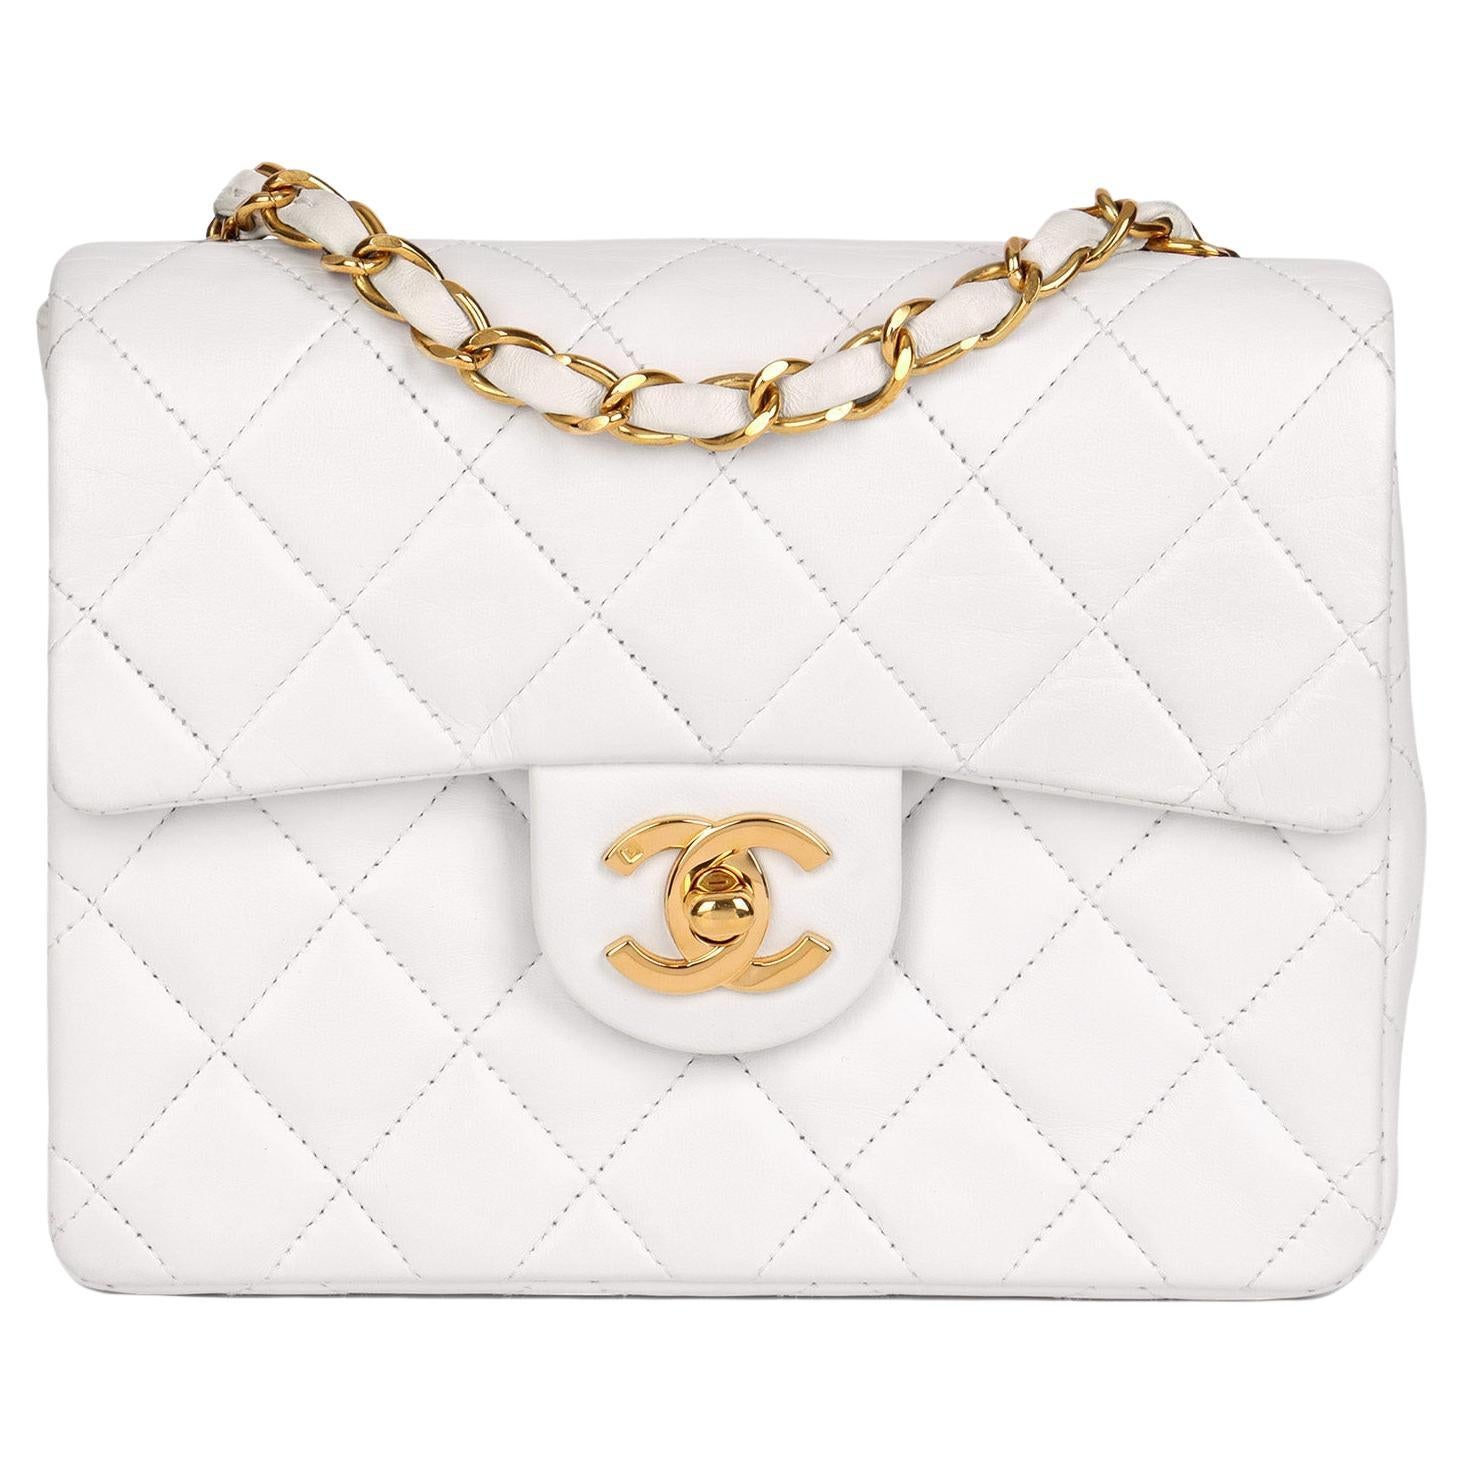 how much is a mini chanel bag